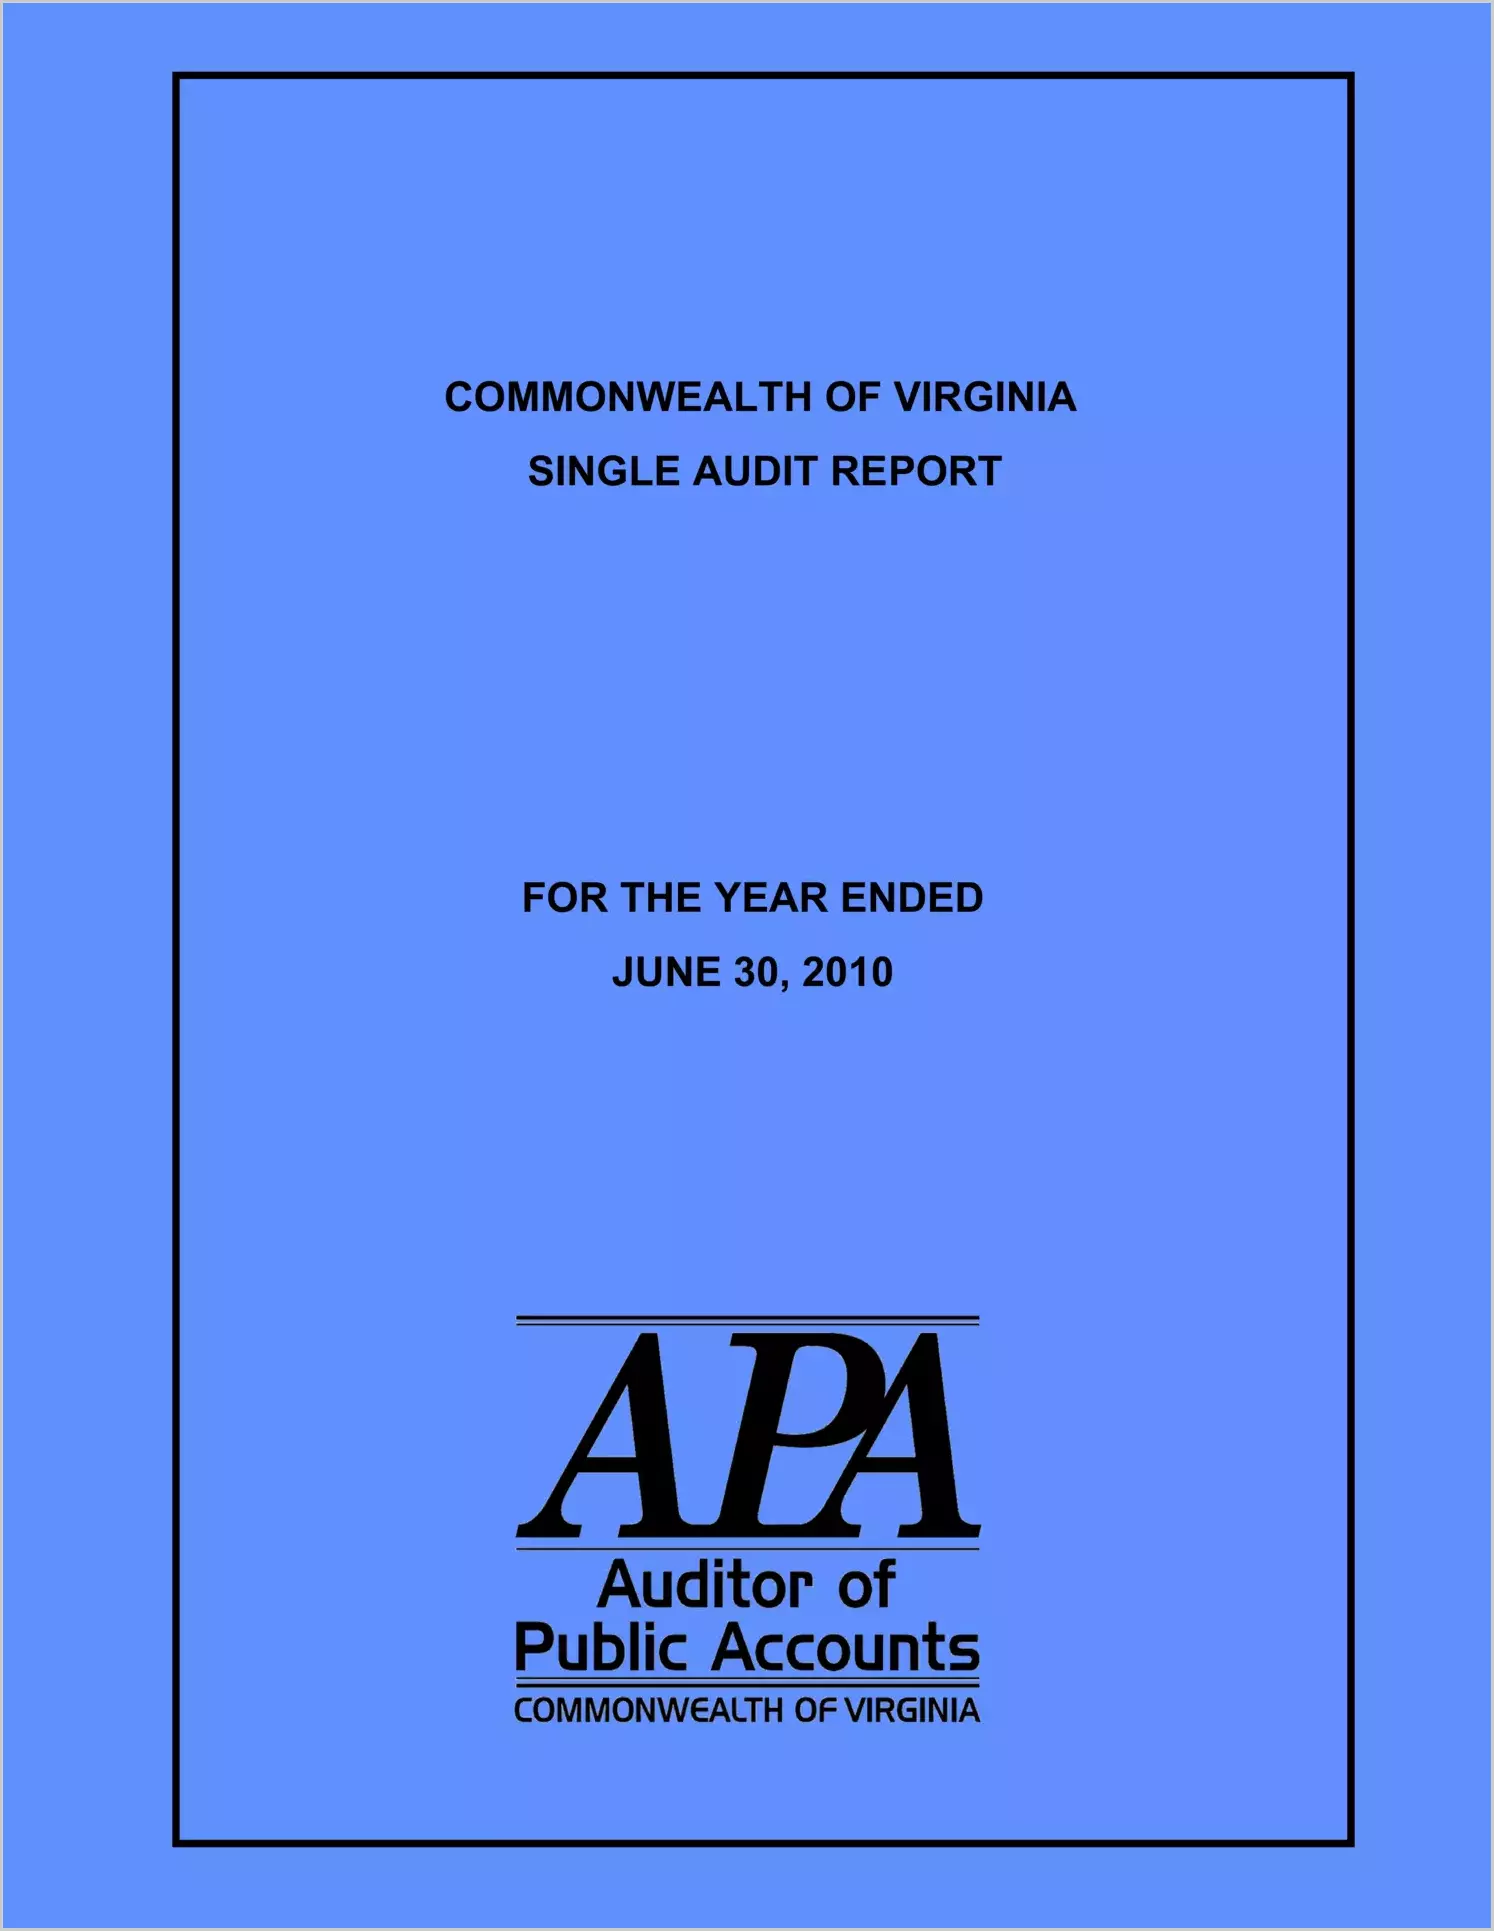 Commonwealth of Virginia Single Audit Report for the Year Ended June 30, 2010